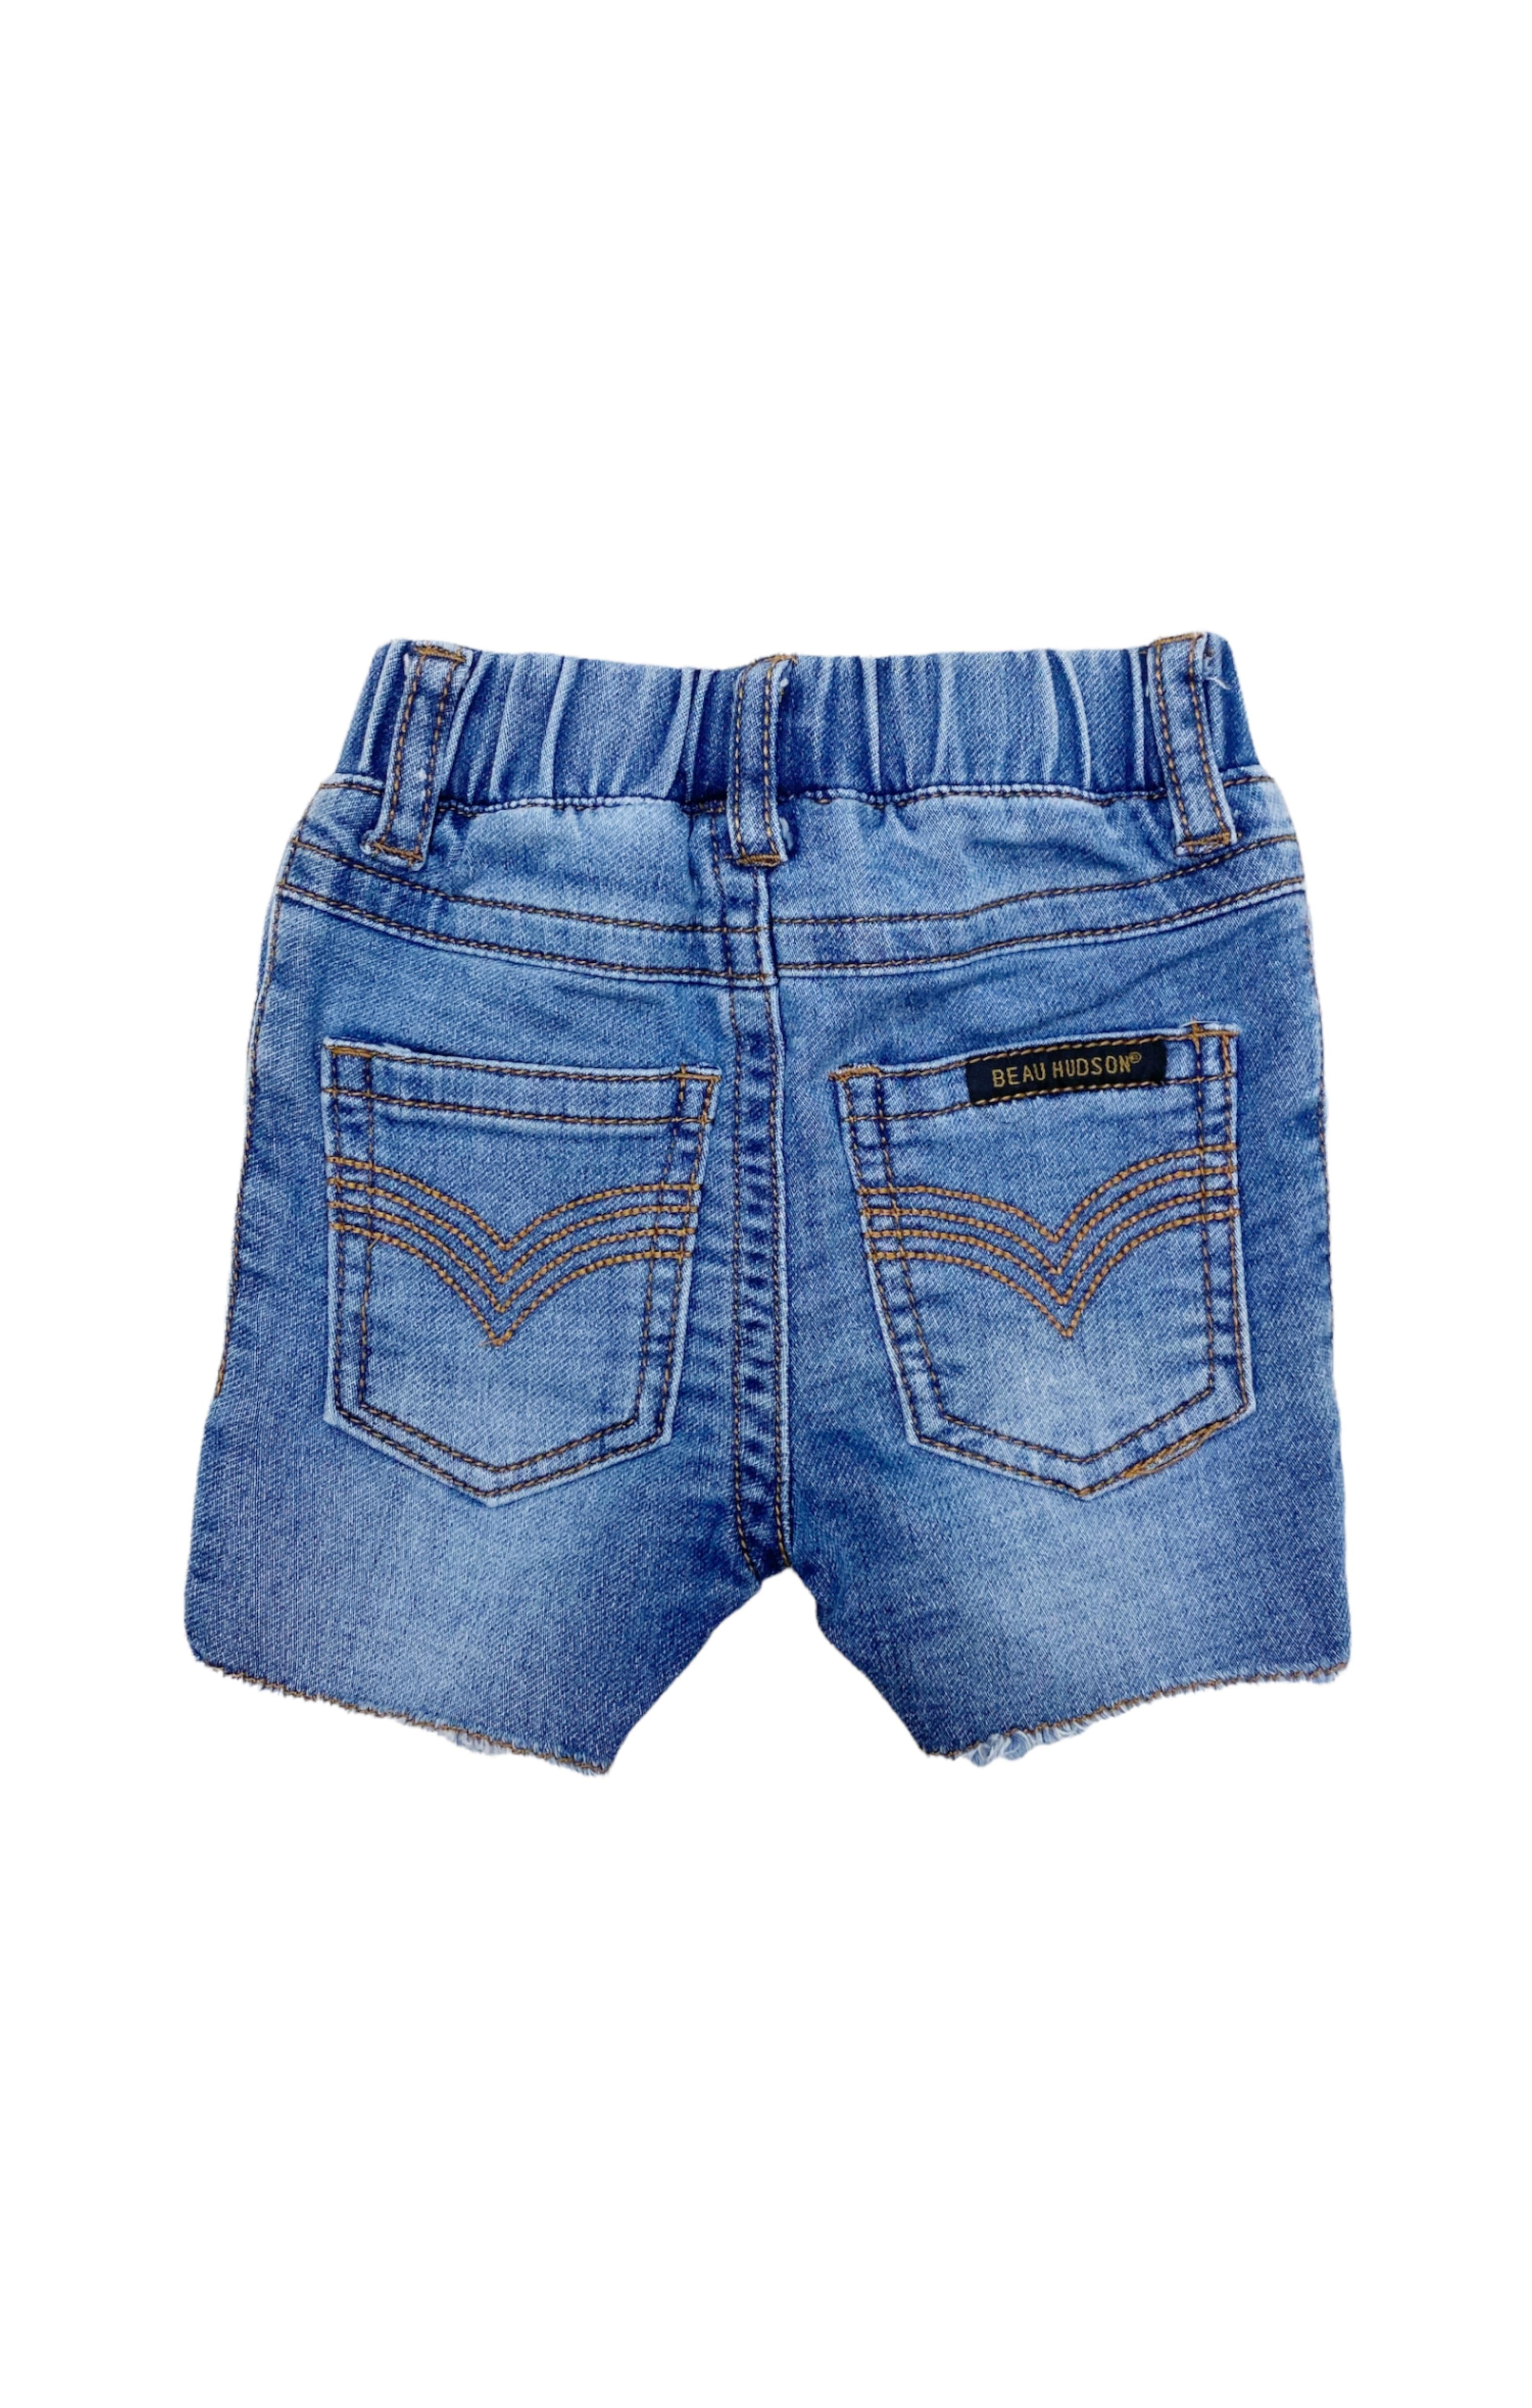 BEAU HUDSON with tags Shorts Size: Youth 2